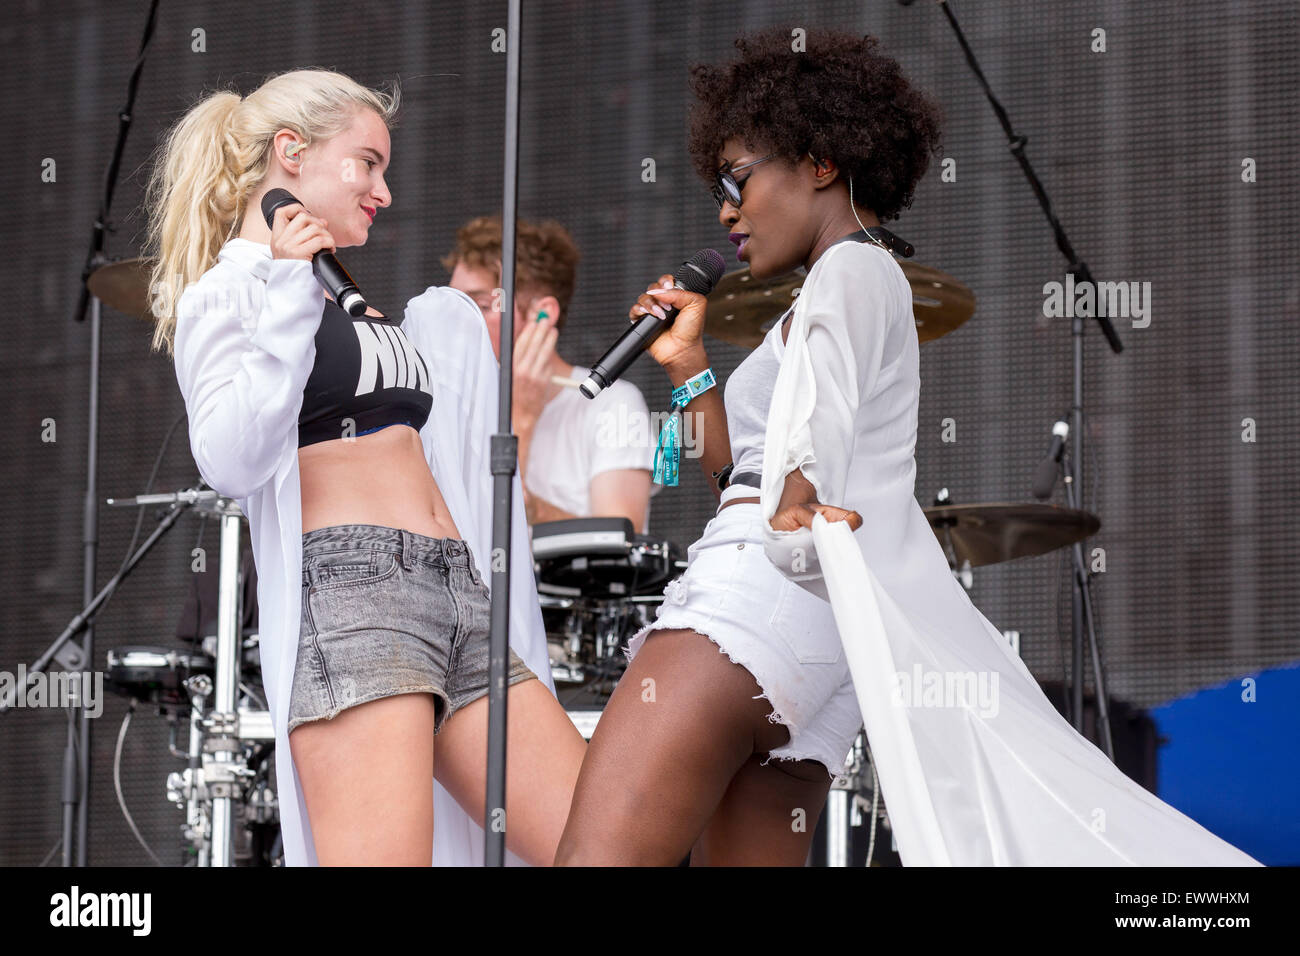 Dover, Deleware, USA. 19th June, 2015. GRACE CHATTO (L) and ELISABETH TROY (R) of Clean Bandit perform live on stage at the Firefly Music Festival in Dover, Delaware © Daniel DeSlover/ZUMA Wire/Alamy Live News Stock Photo